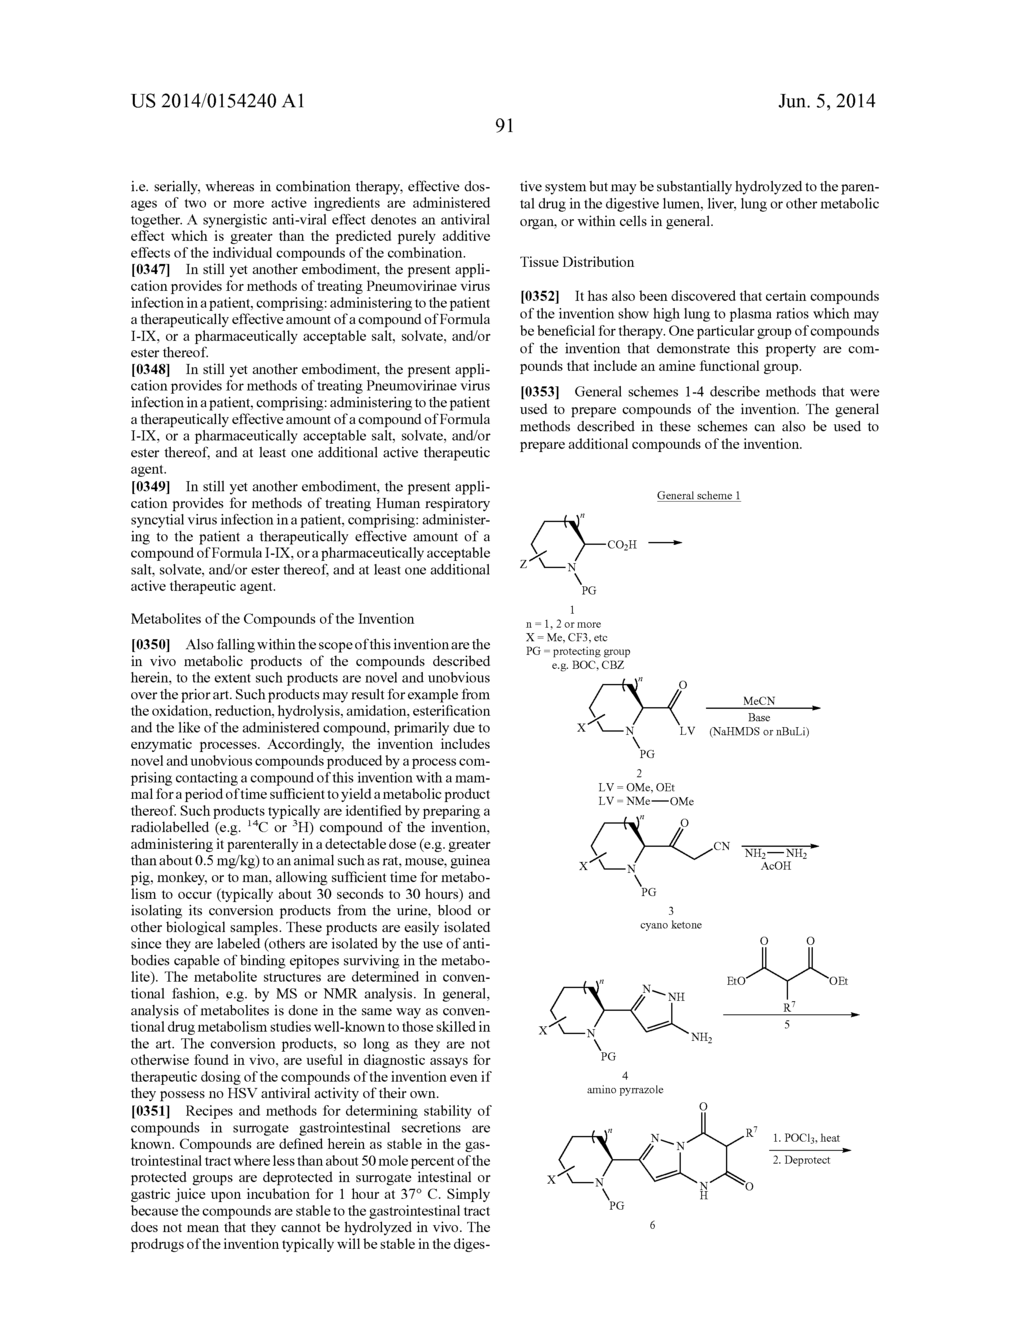 PYRAZOLO[1,5-A]PYRIMIDINES FOR ANTIVIRAL TREATMENT - diagram, schematic, and image 92